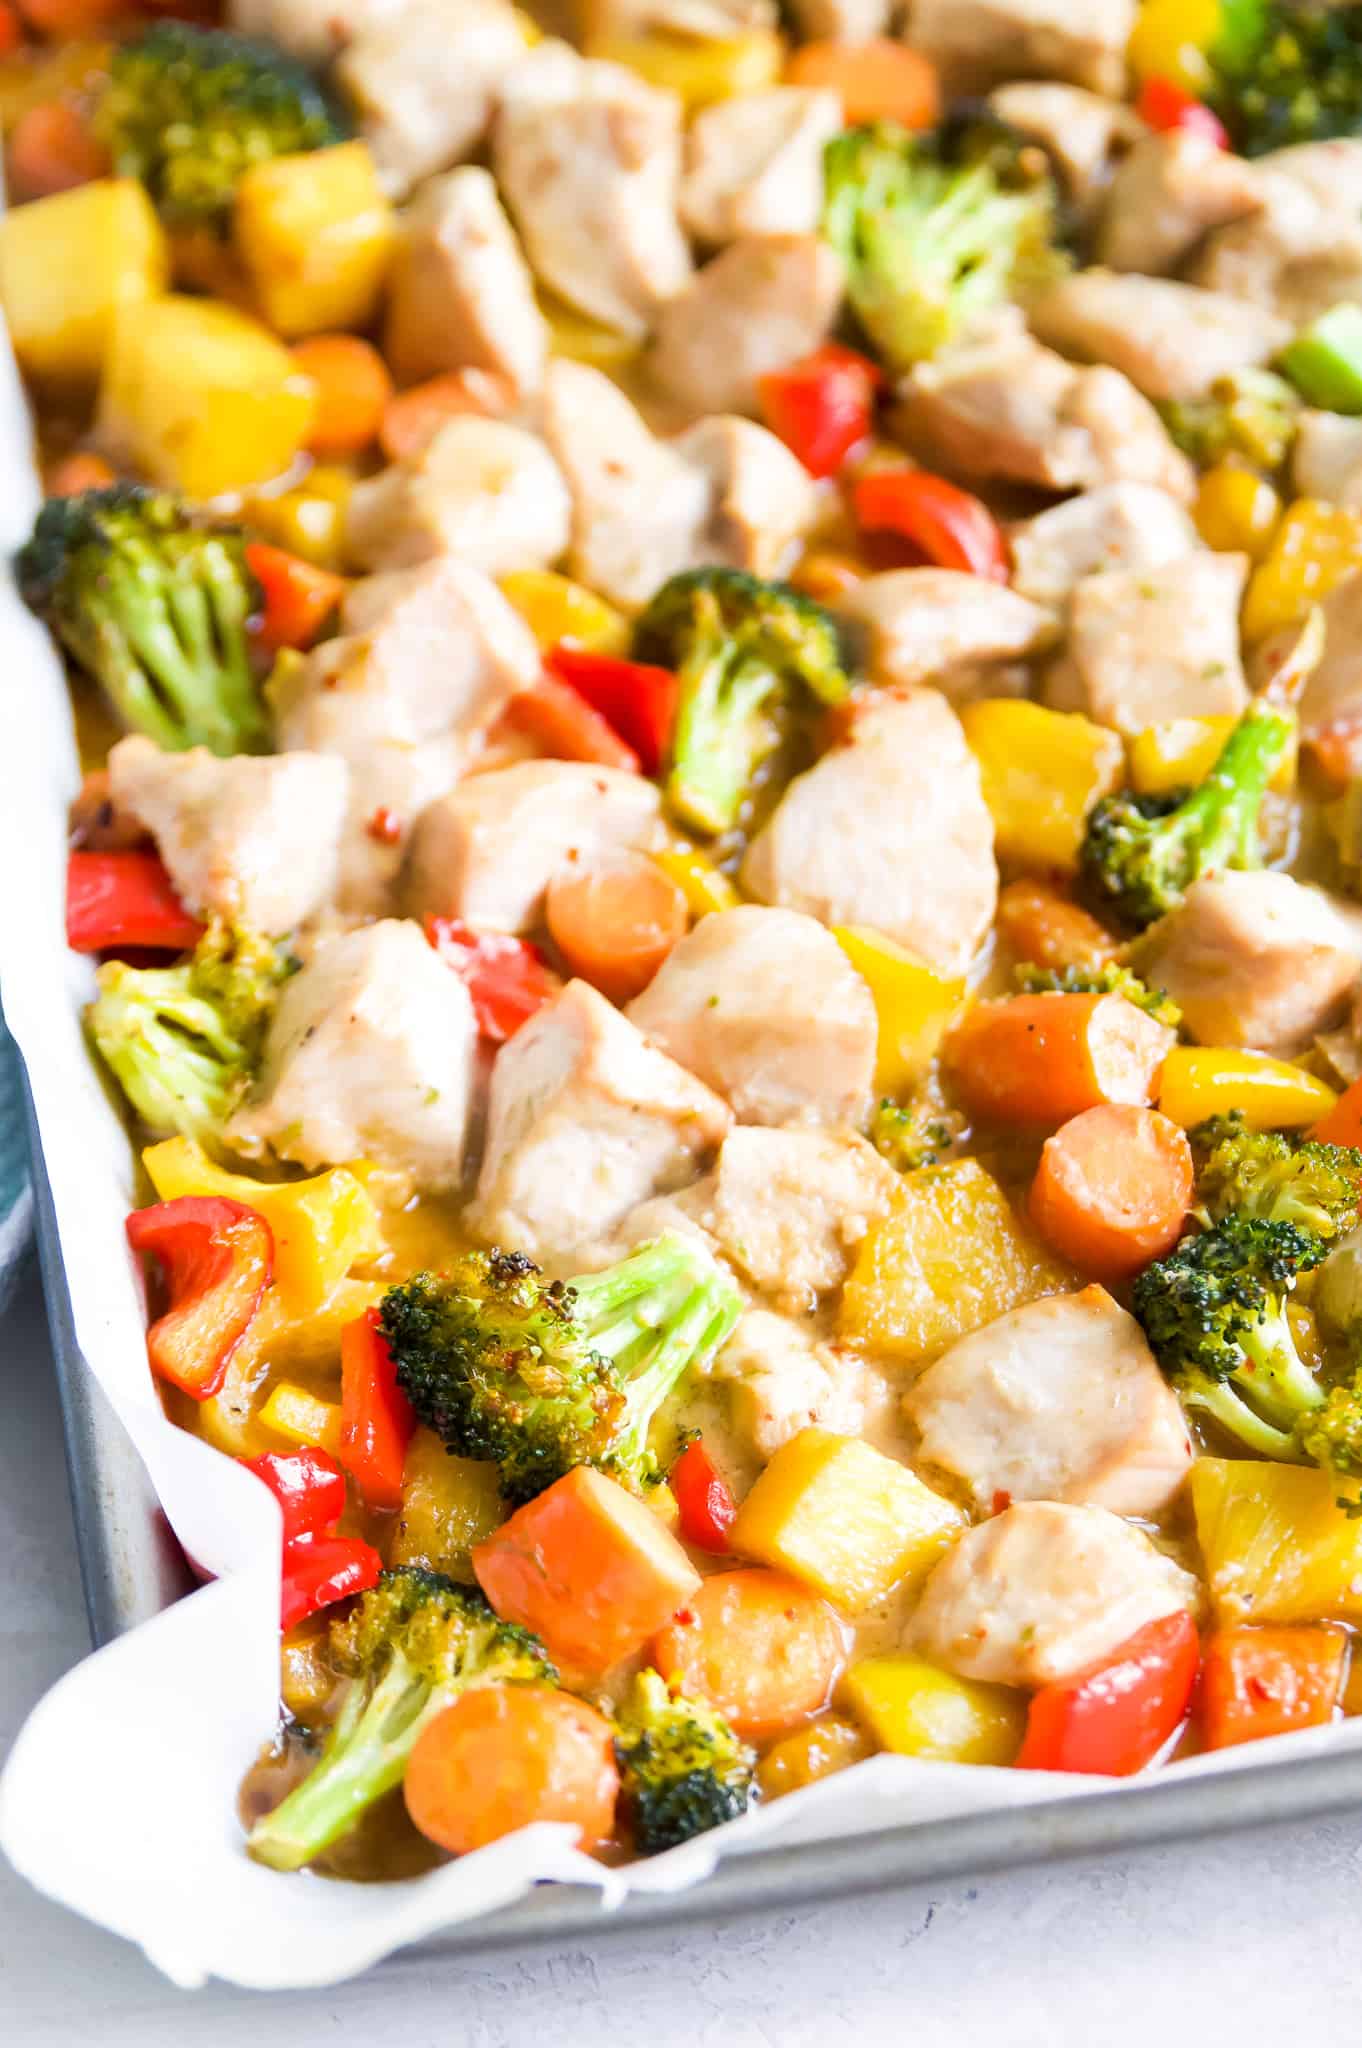 A tray of teriyaki chicken stir fry  with broccoli, peppers and pineapple.